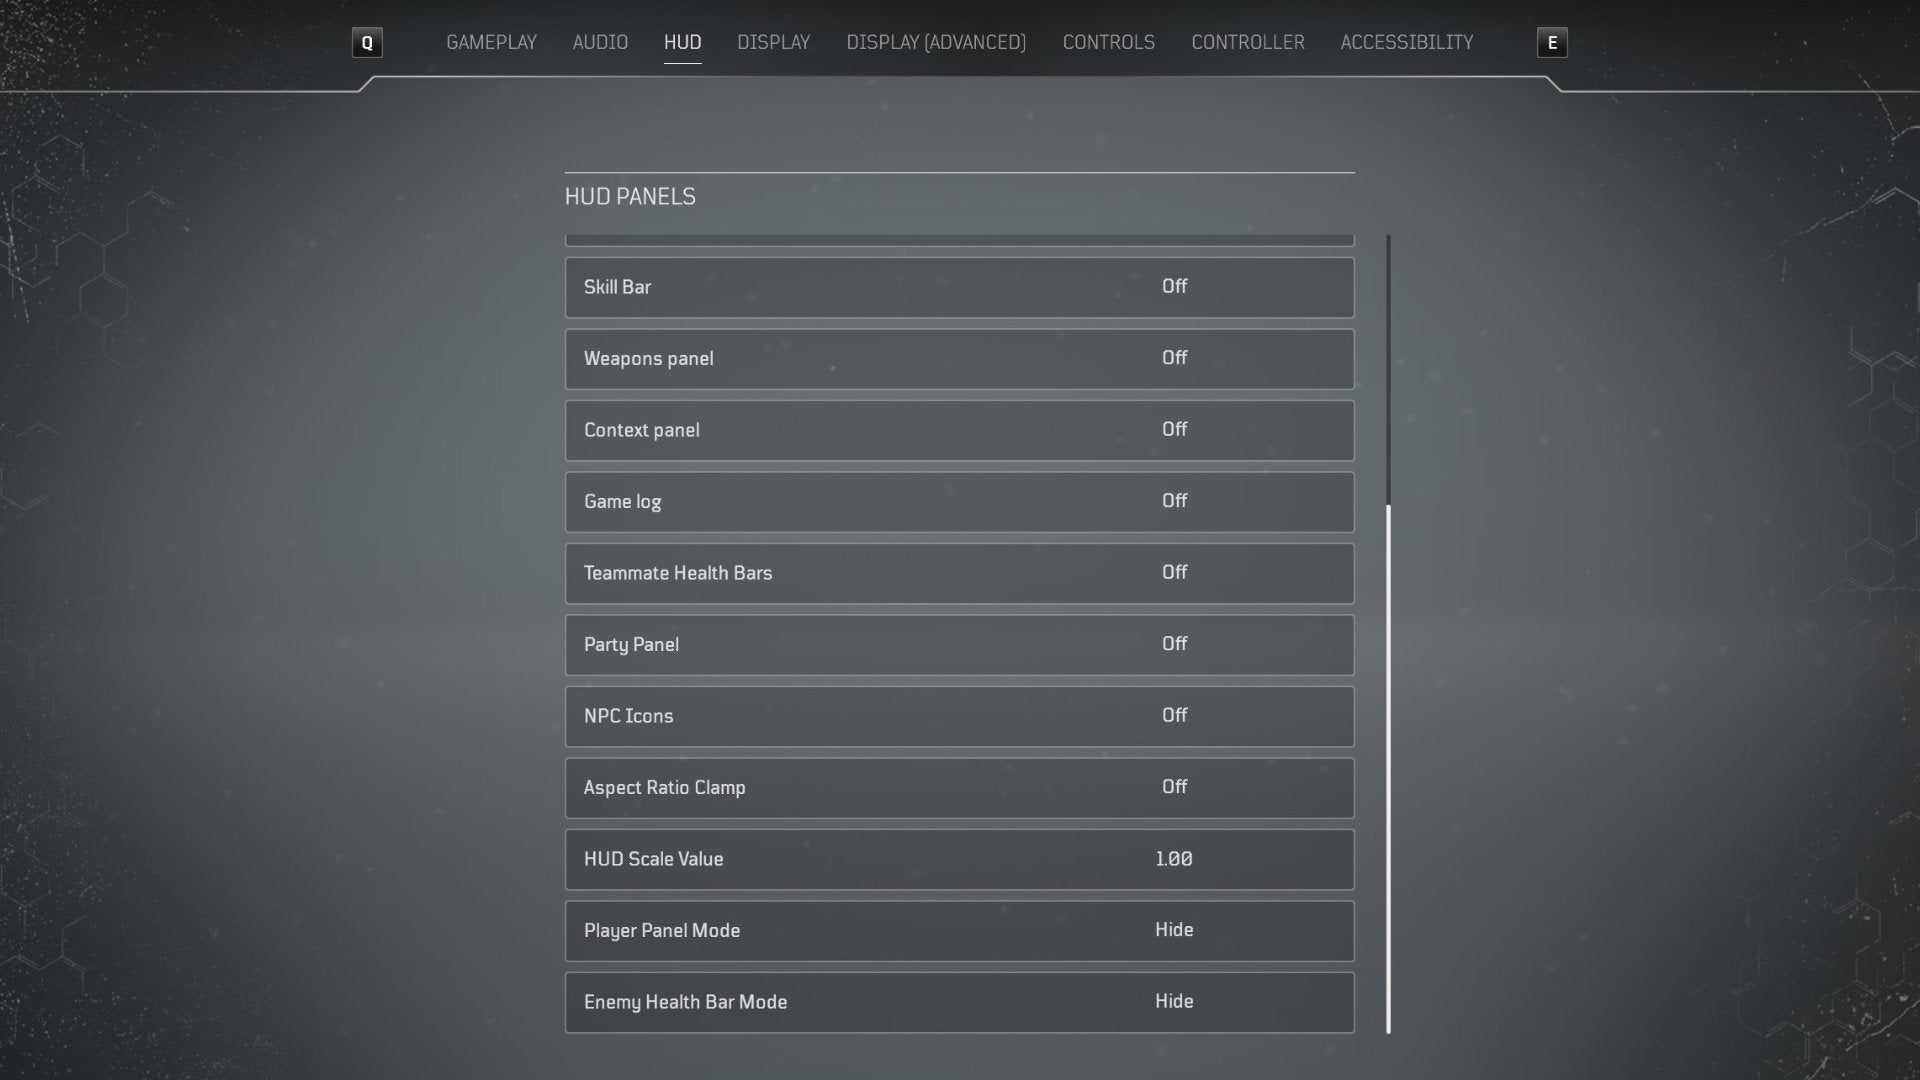 A screenshot of the Outriders HUD settings menu, with all settings turned off.